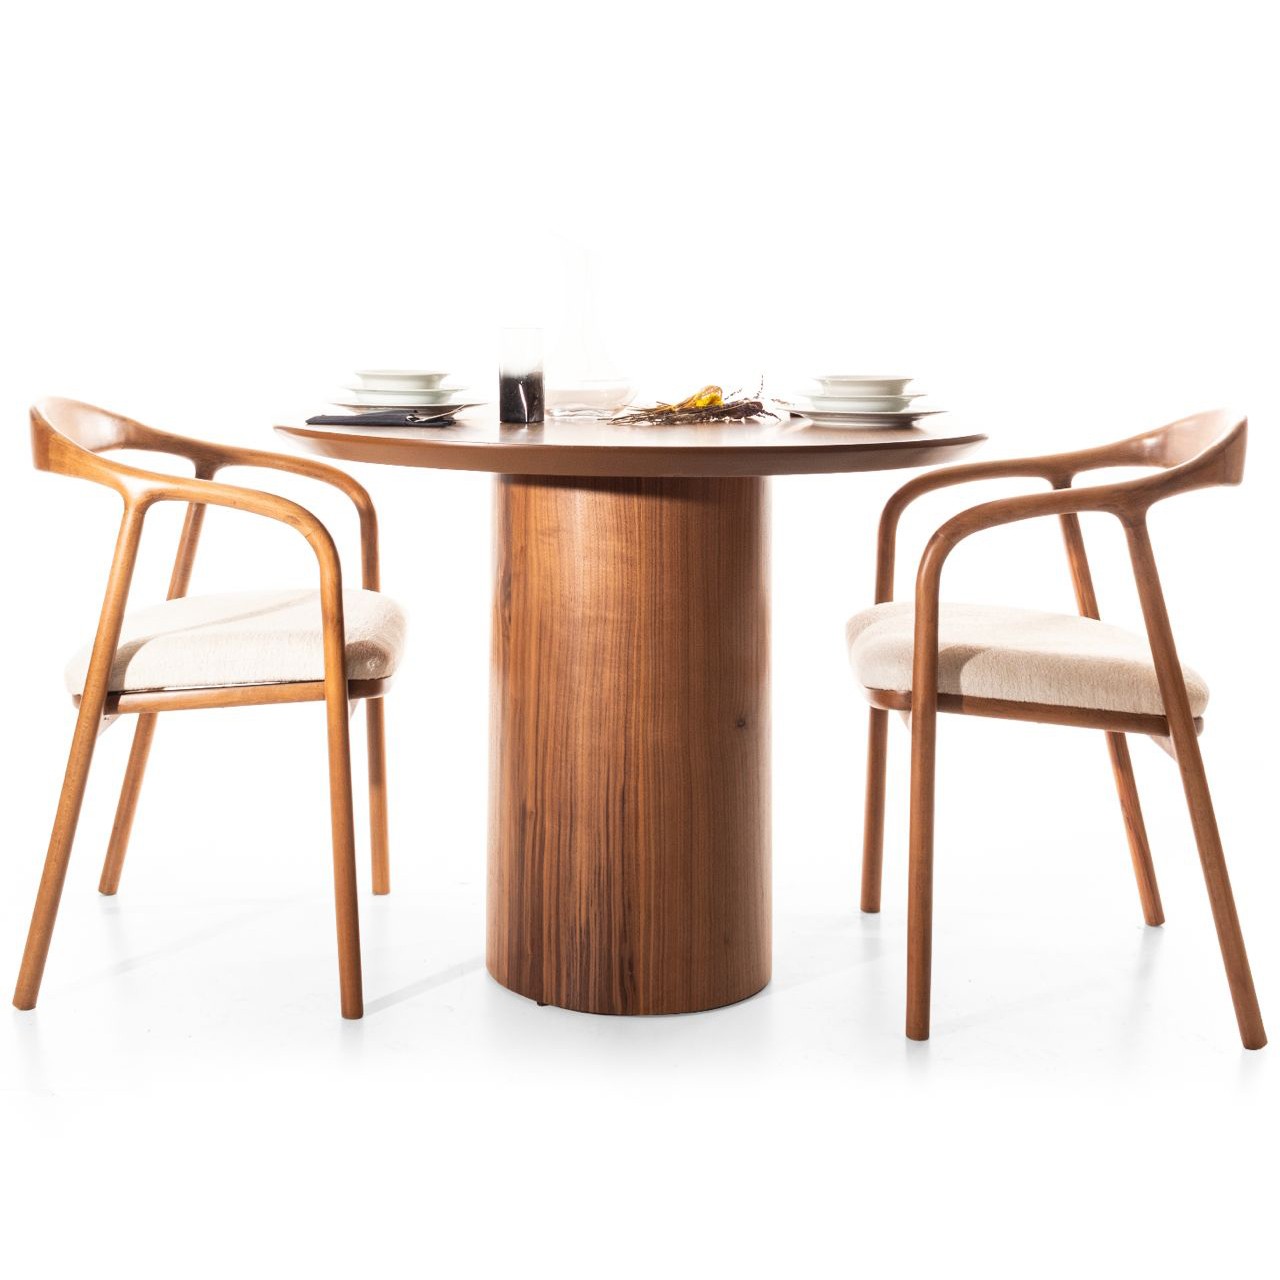 Forte Dining Table